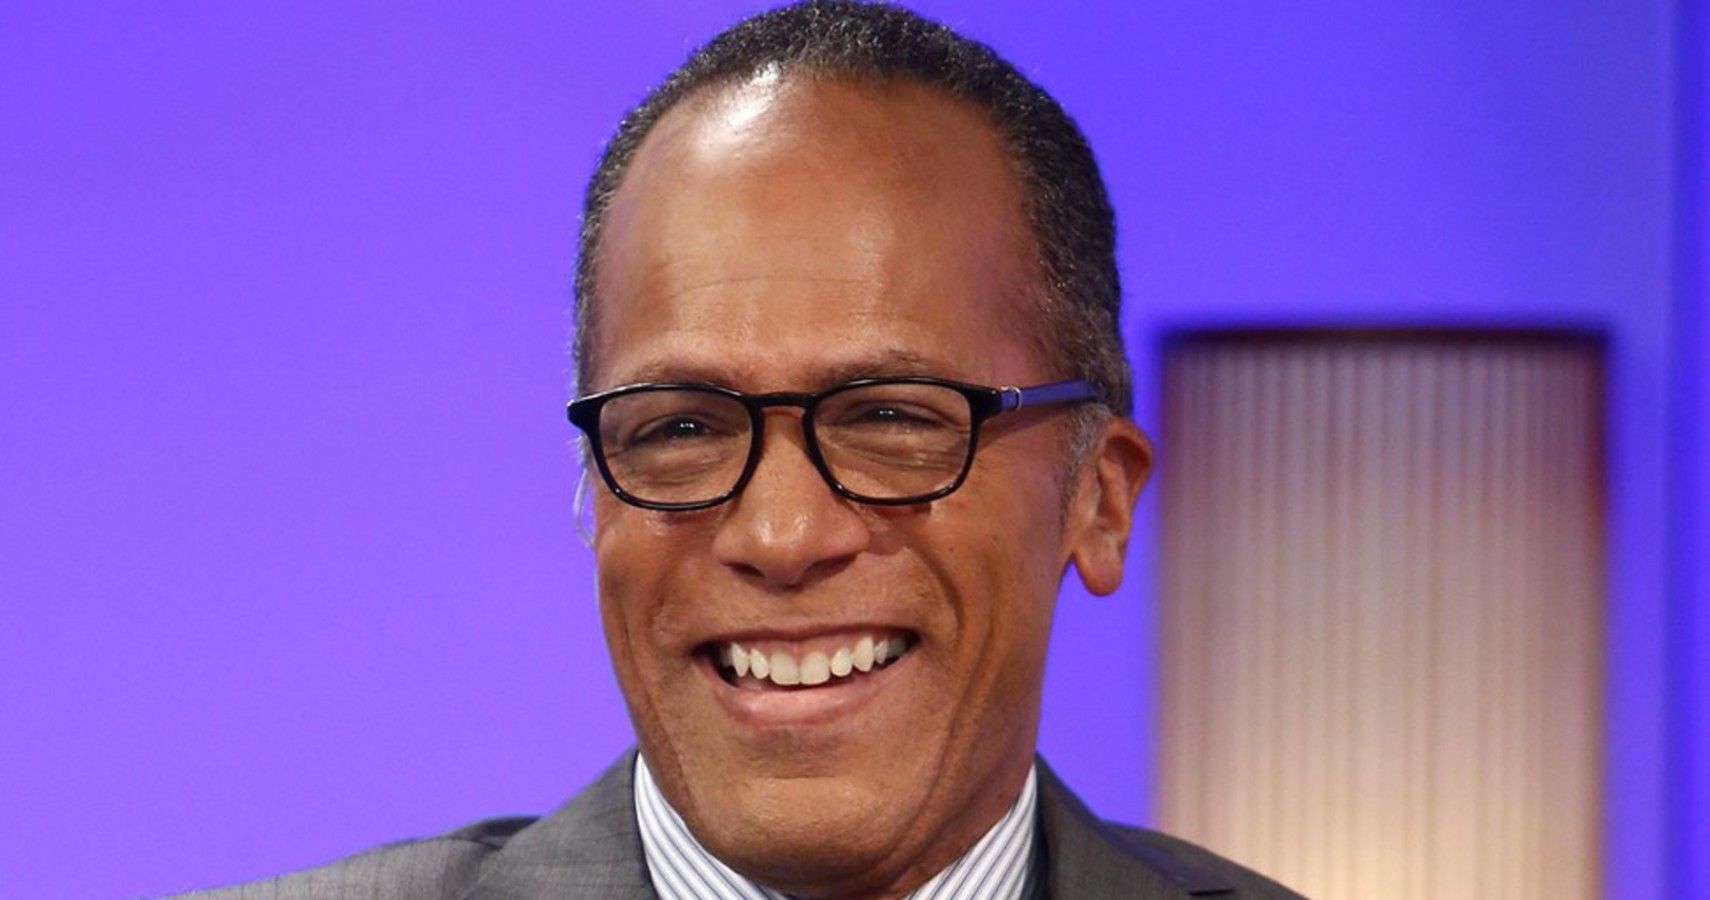 NBC s News Anchor Lester Holt Expecting Another Grandchild